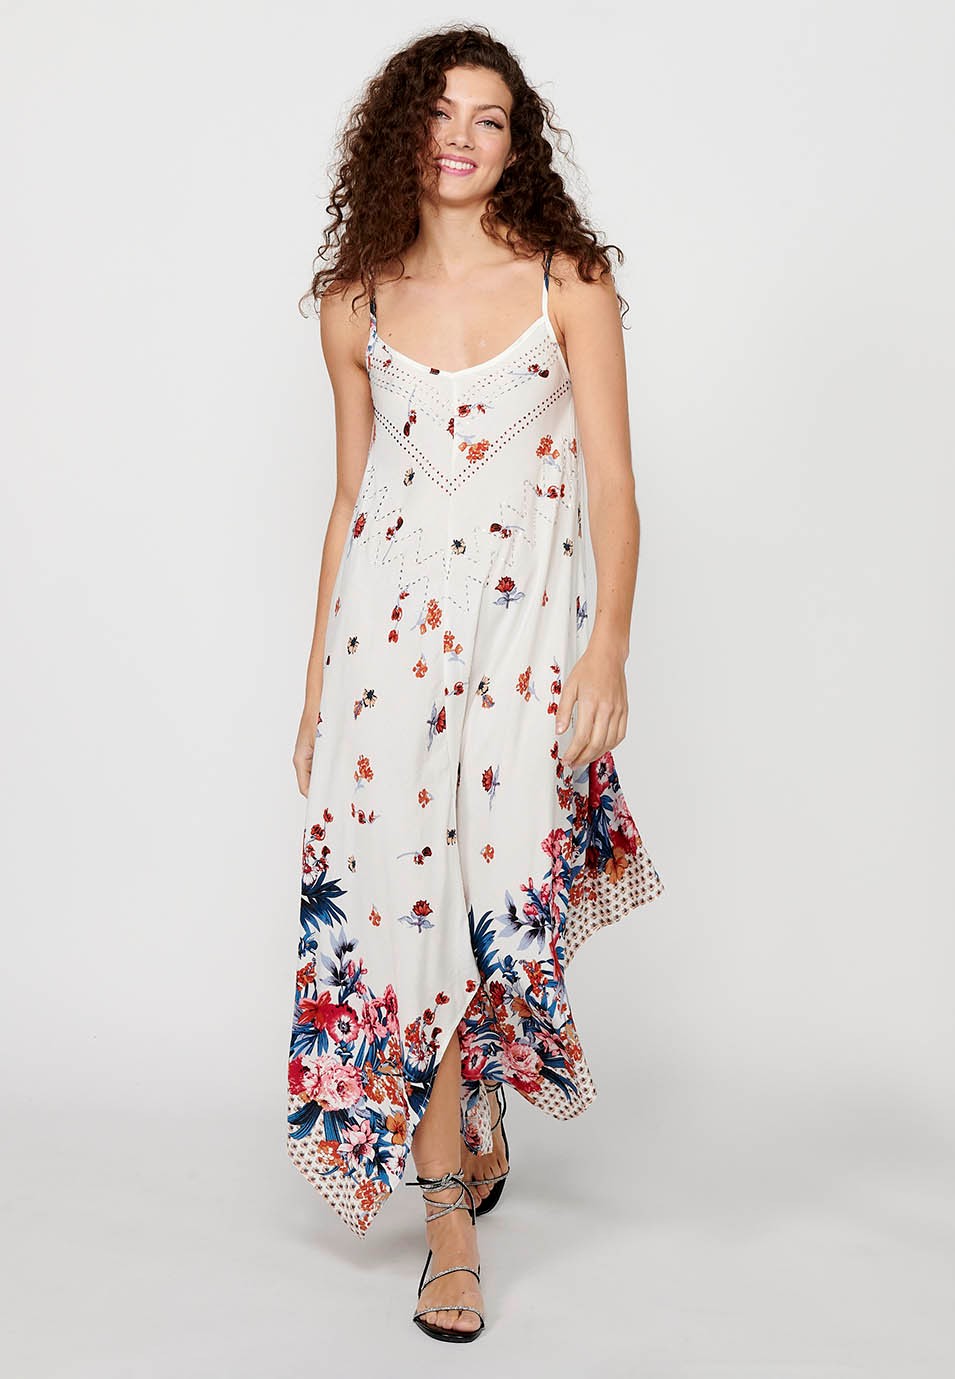 Strap Dress with V-neckline and White Floral Print for Women 2